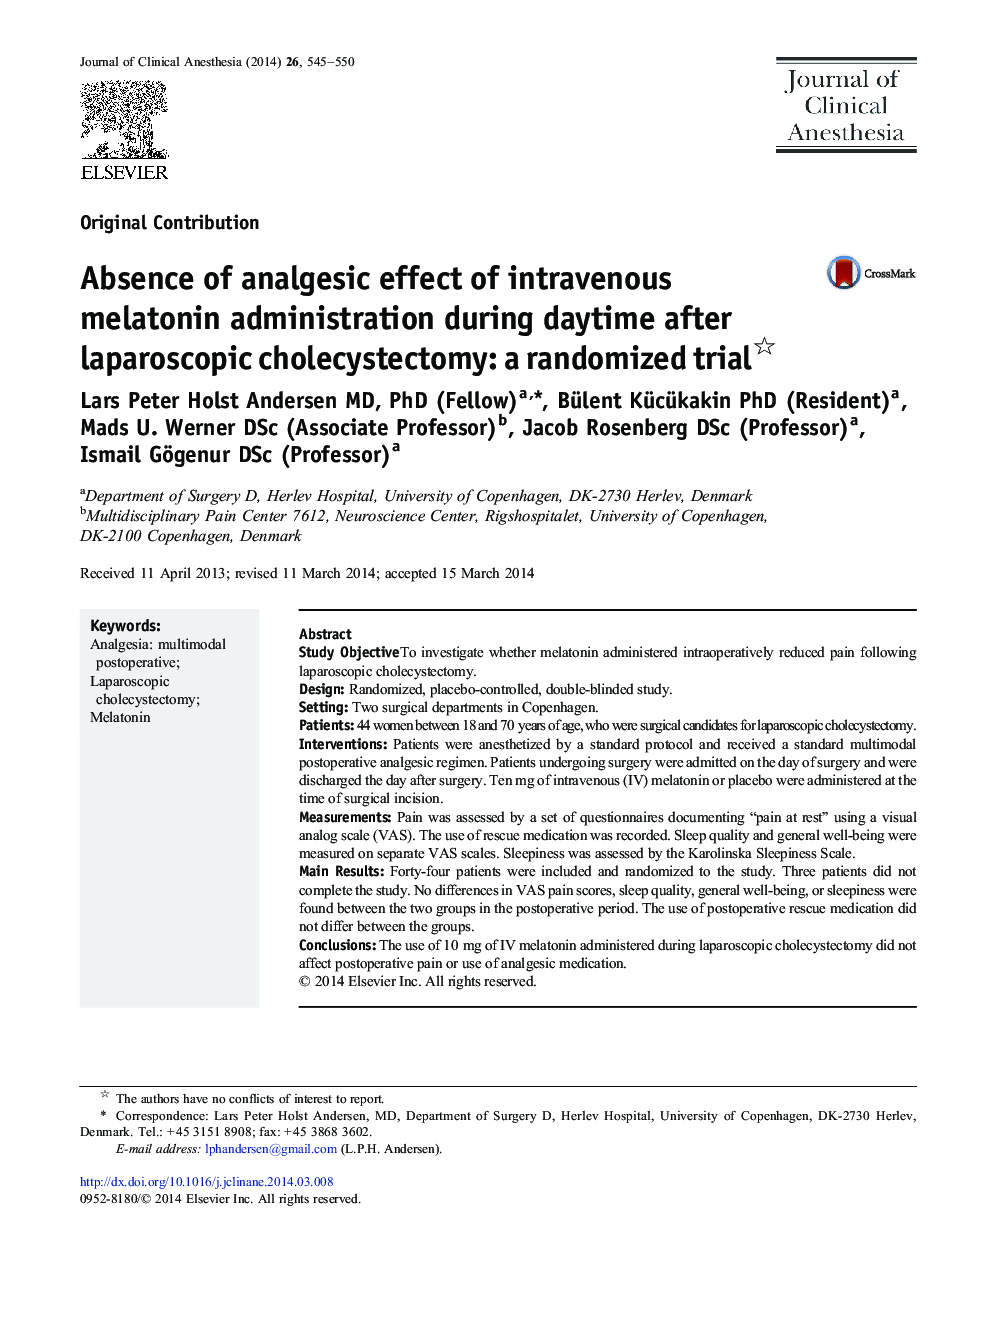 Absence of analgesic effect of intravenous melatonin administration during daytime after laparoscopic cholecystectomy: a randomized trial 